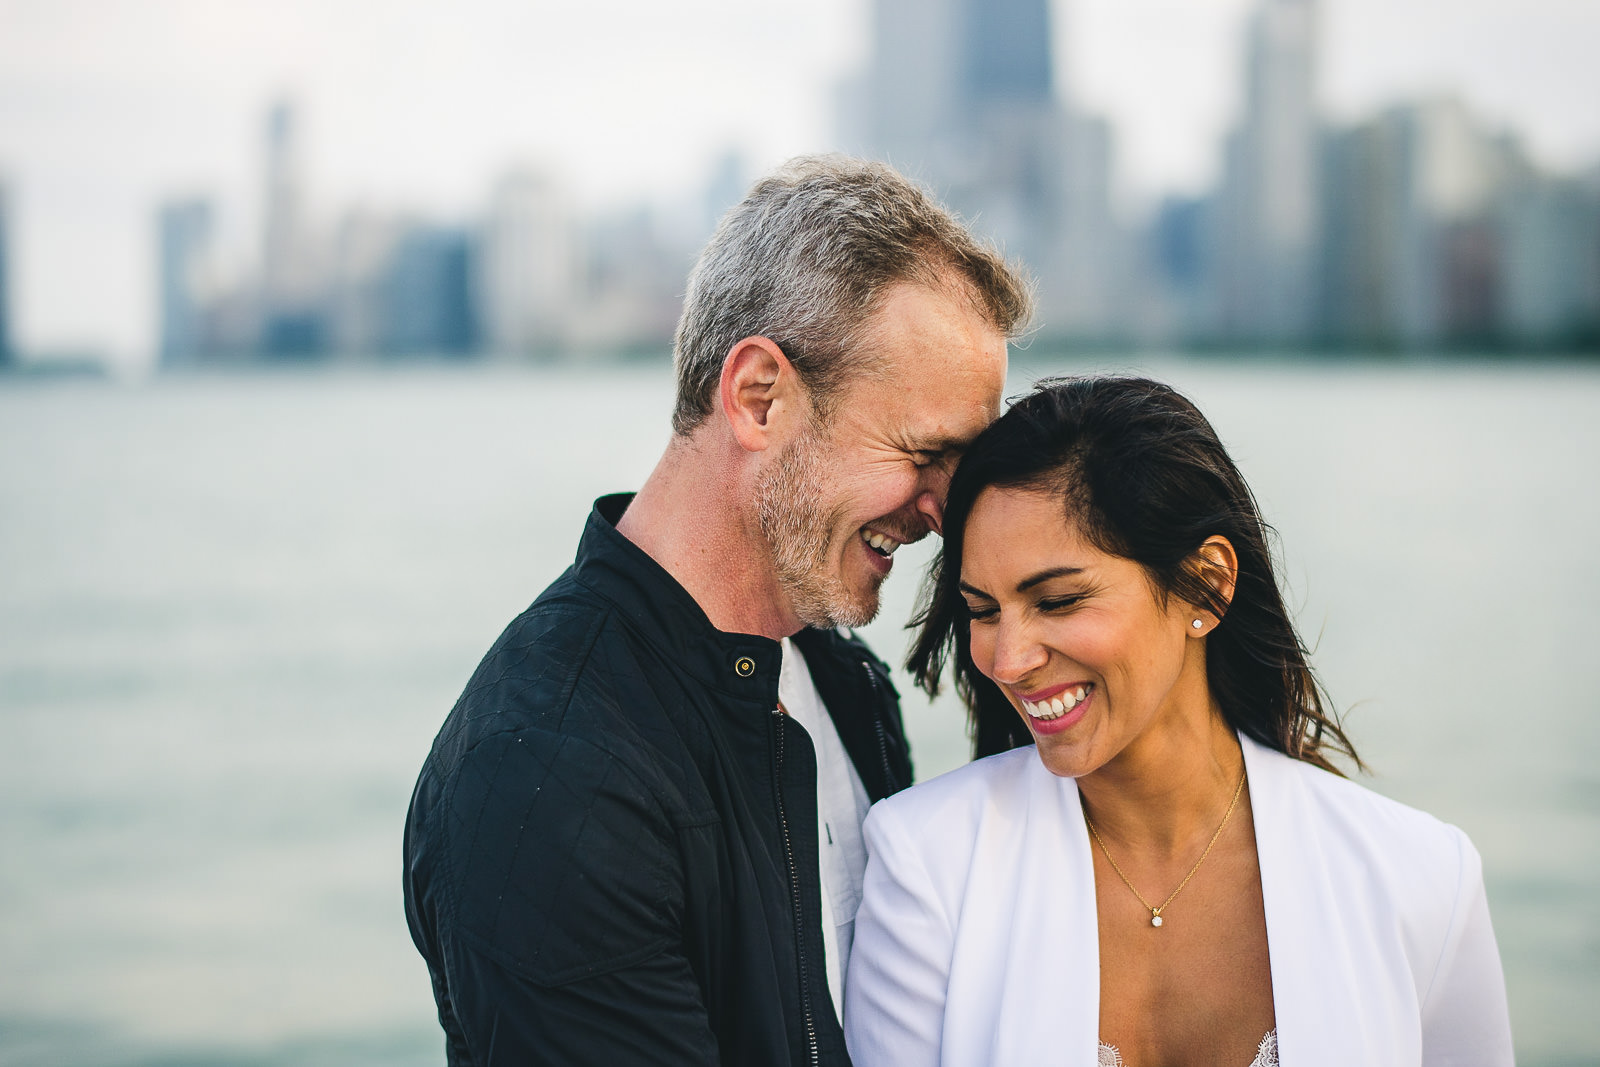 09 downtown chicago engagement photos - Chicago Engagement Photos // Lili + Danny